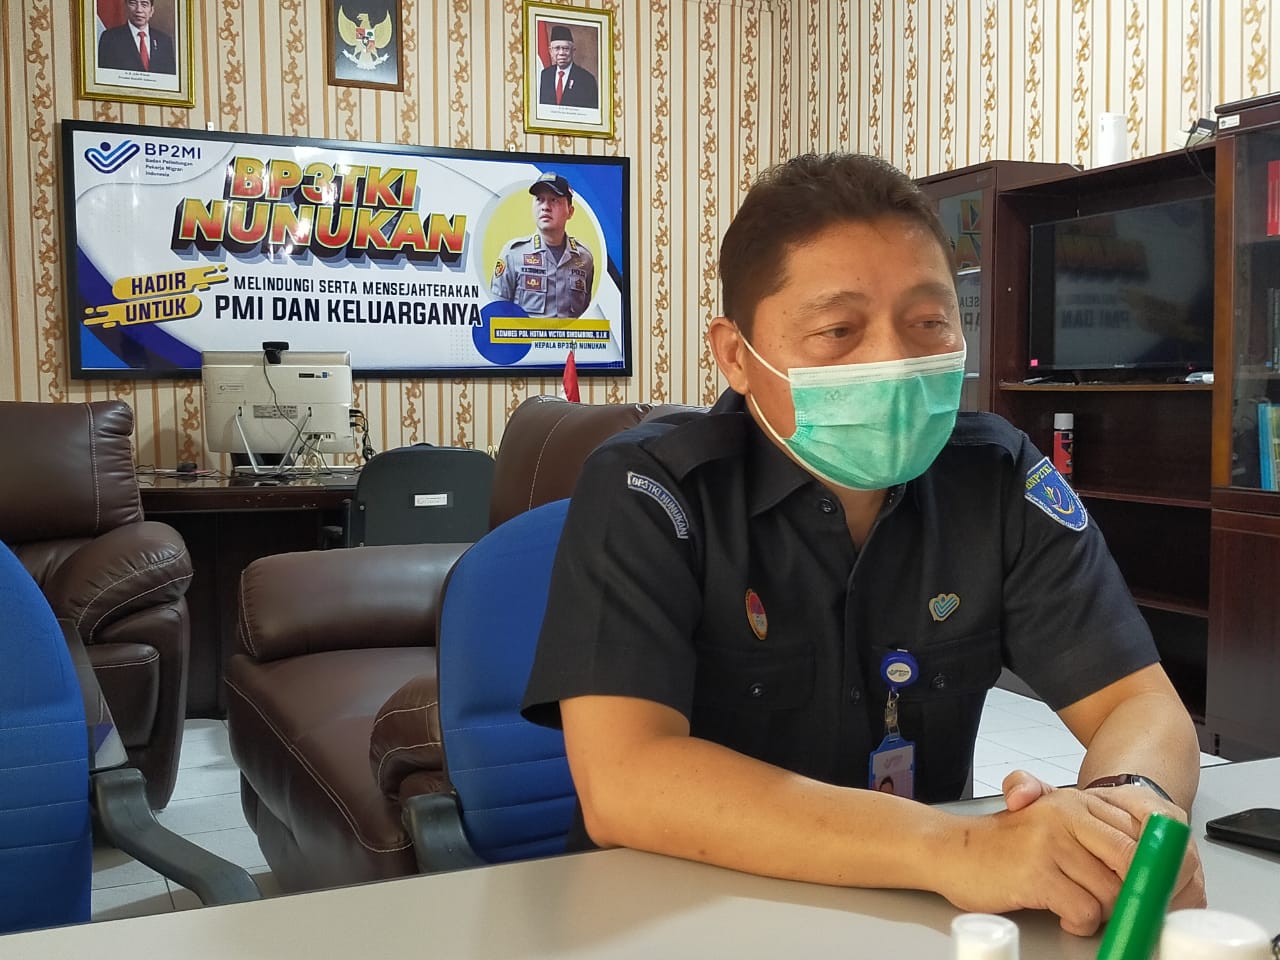  The image shows a man wearing a surgical mask and a navy uniform with the logo of the Indonesian Ministry of Manpower. He is sitting at a desk in an office, with a computer and a television in the background.